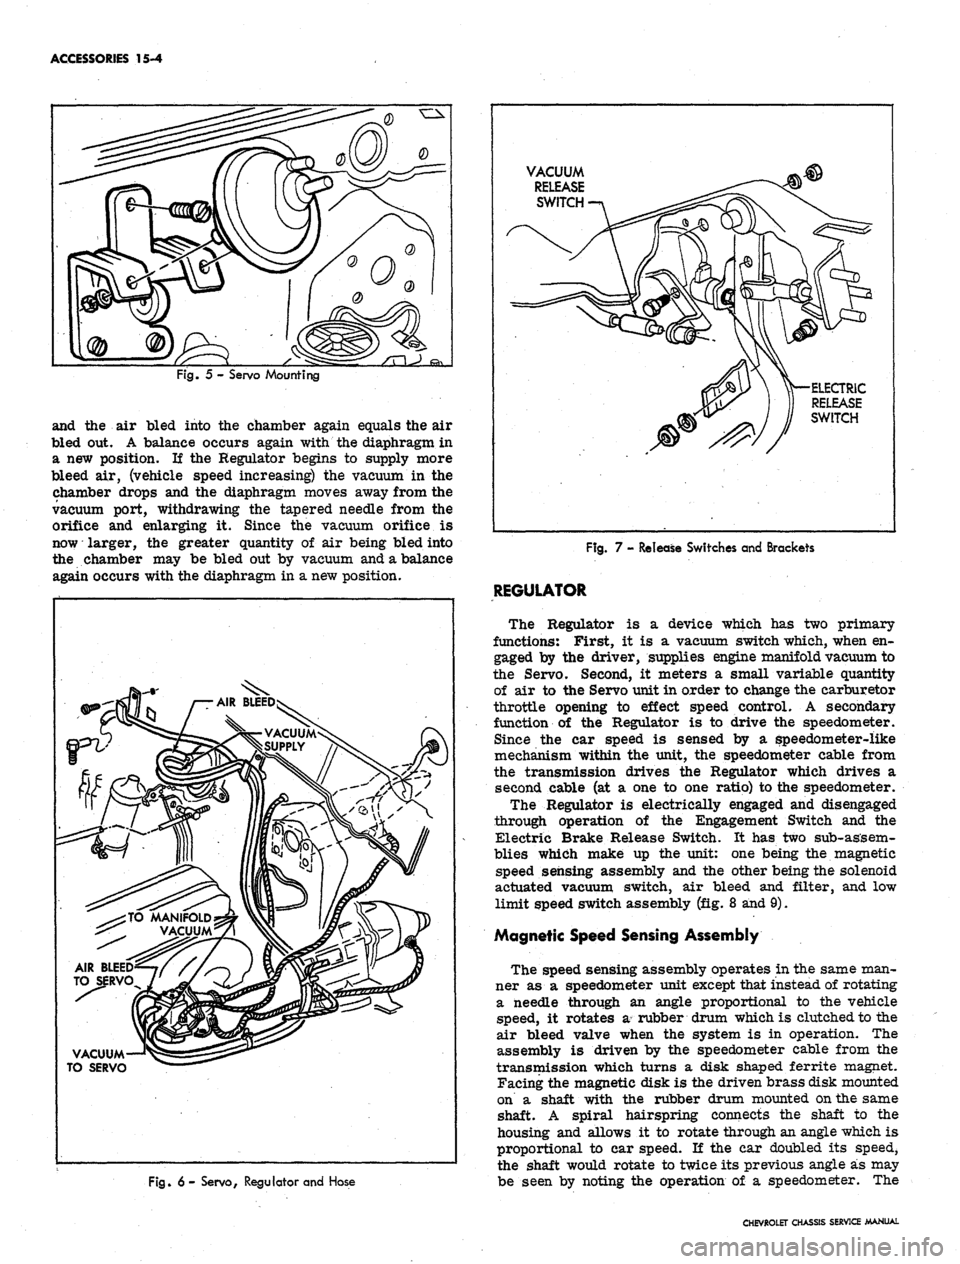 CHEVROLET CAMARO 1967 1.G Chassis Workshop Manual 
ACCESSORIES 15-4

Fig. 5 - Servo Mounting

and the air bled into the chamber again equals the air

bled out. A balance occurs again with the diaphragm in

a new position. If the Regulator begins to s